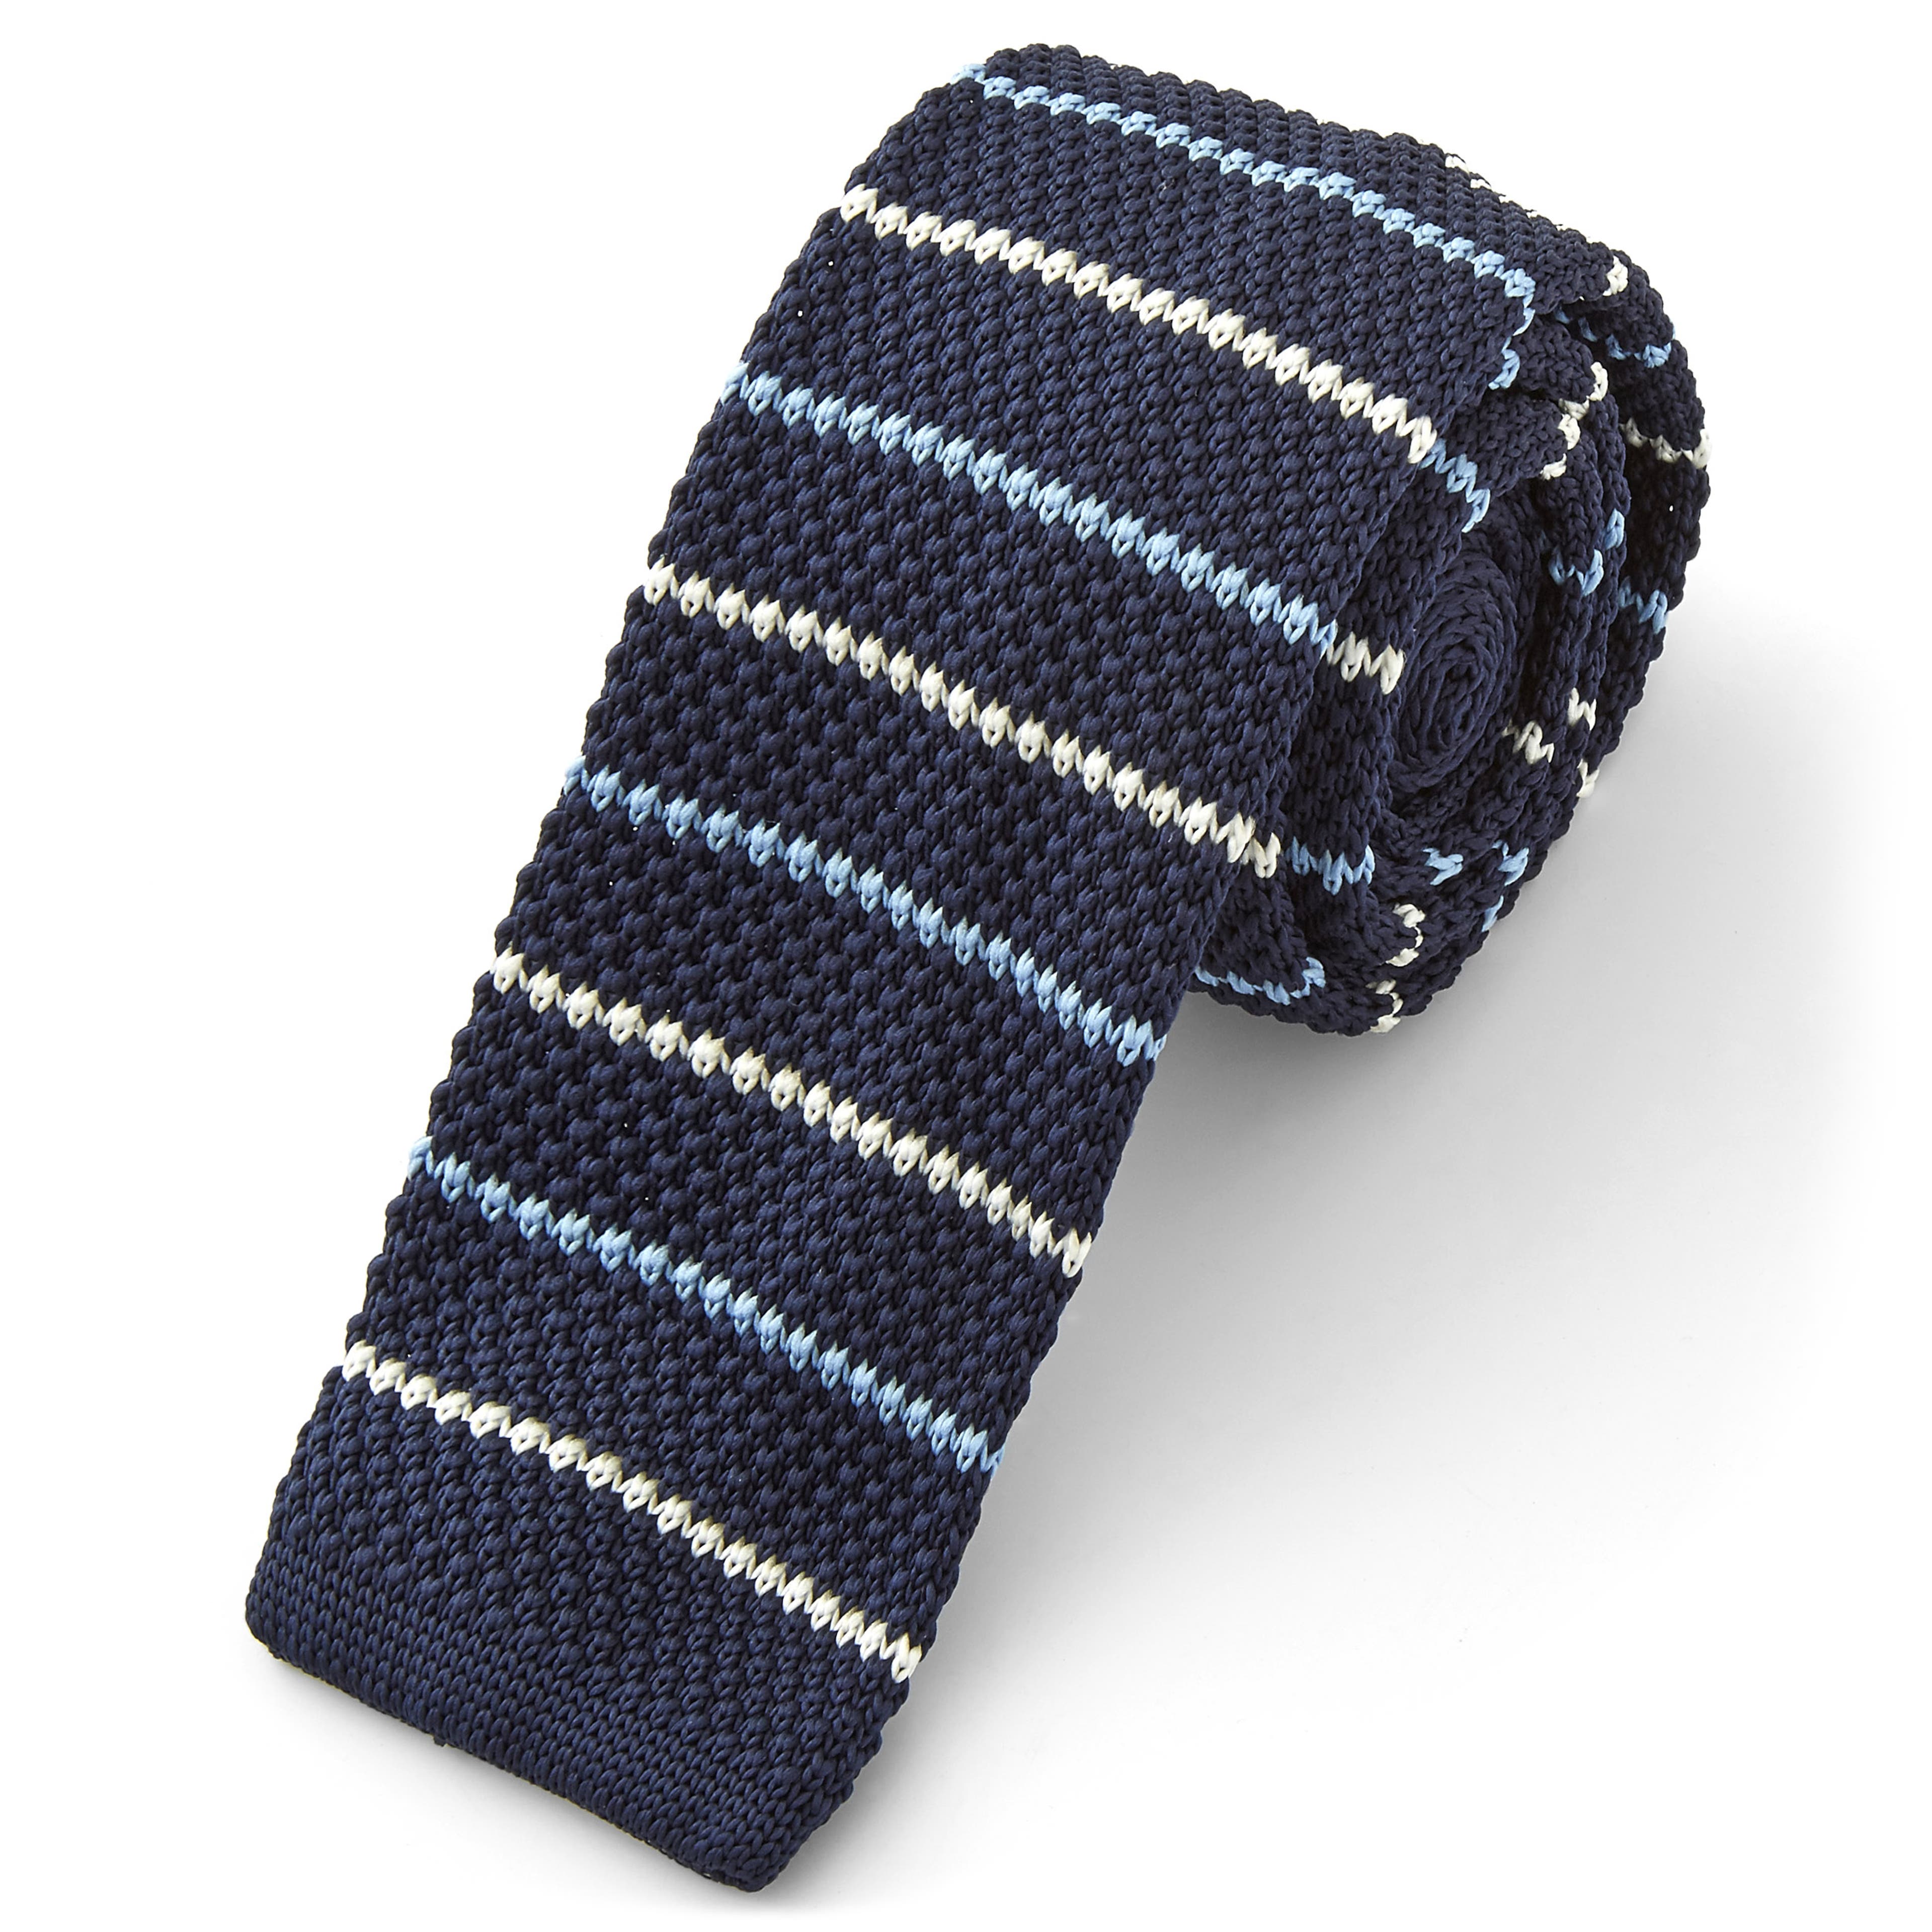 Navy Blue Striped Knitted Tie, In stock!